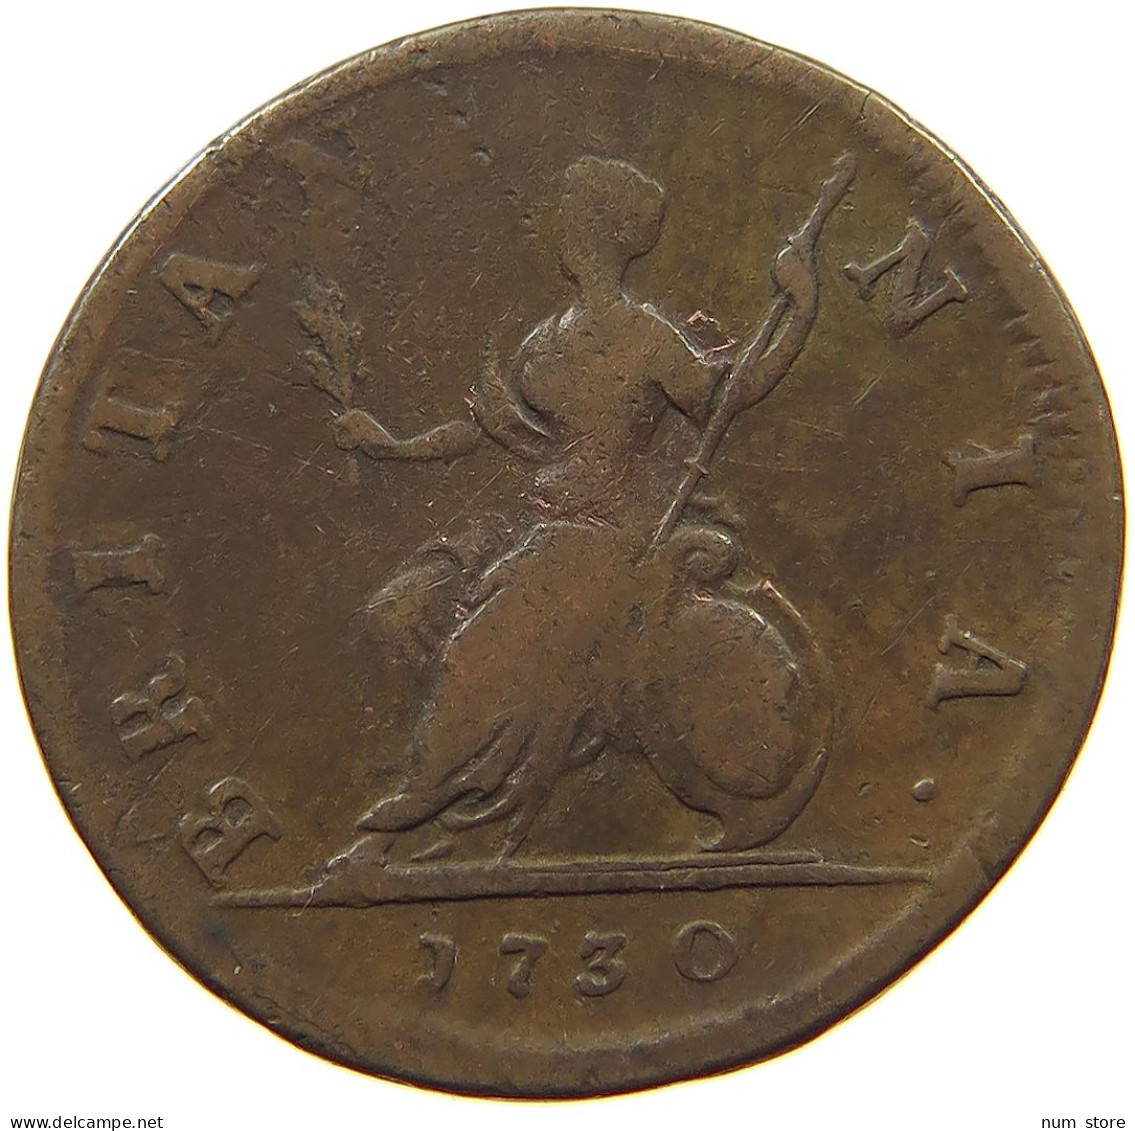 GREAT BRITAIN FARTHING 1730 George II. 1727-1760. #t149 0207 - A. 1 Farthing